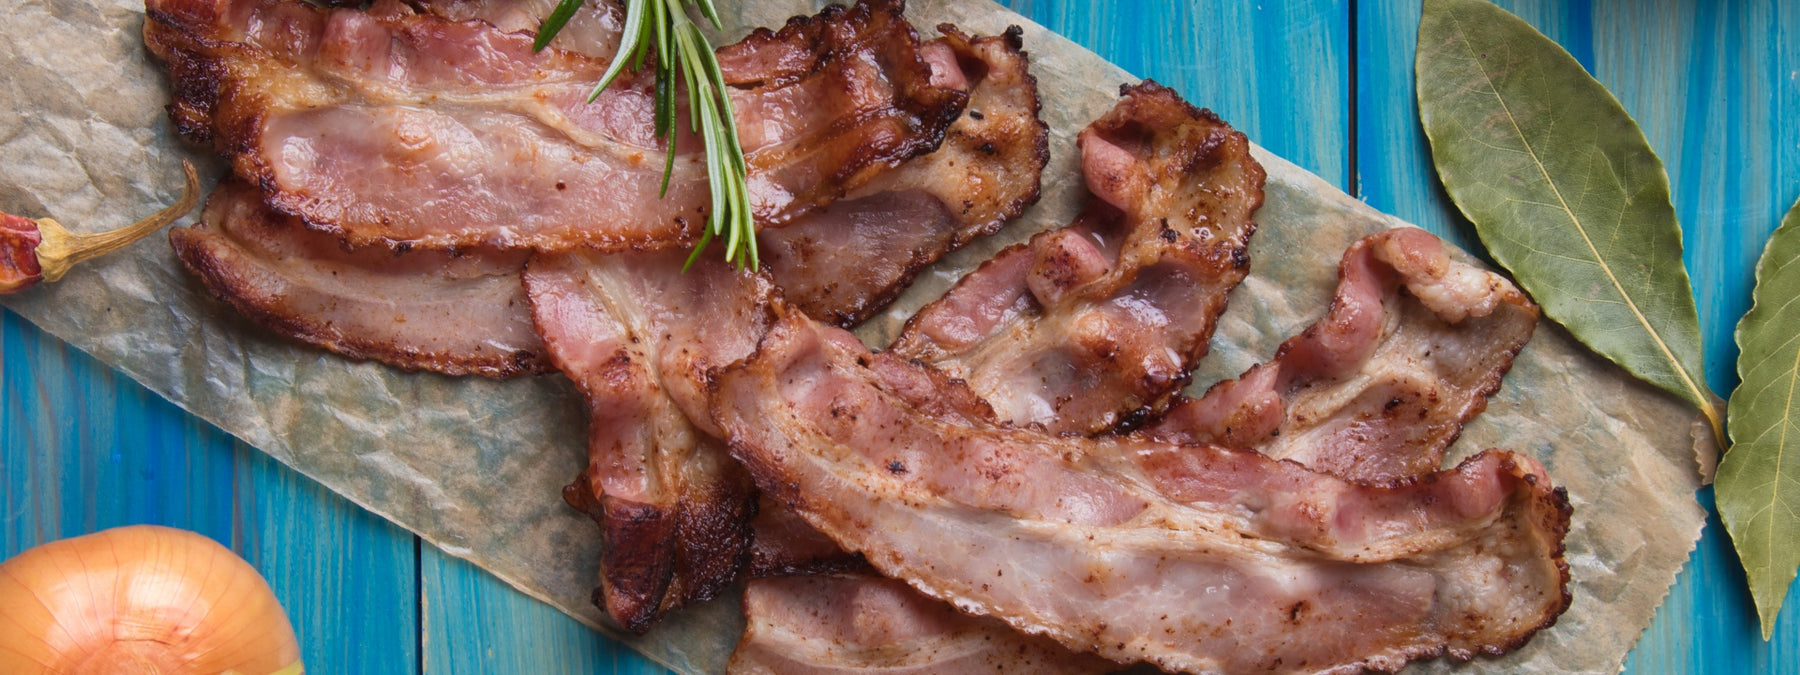 Processed Meat: Is it Cancer Causing and as Dangerous as Smoking?